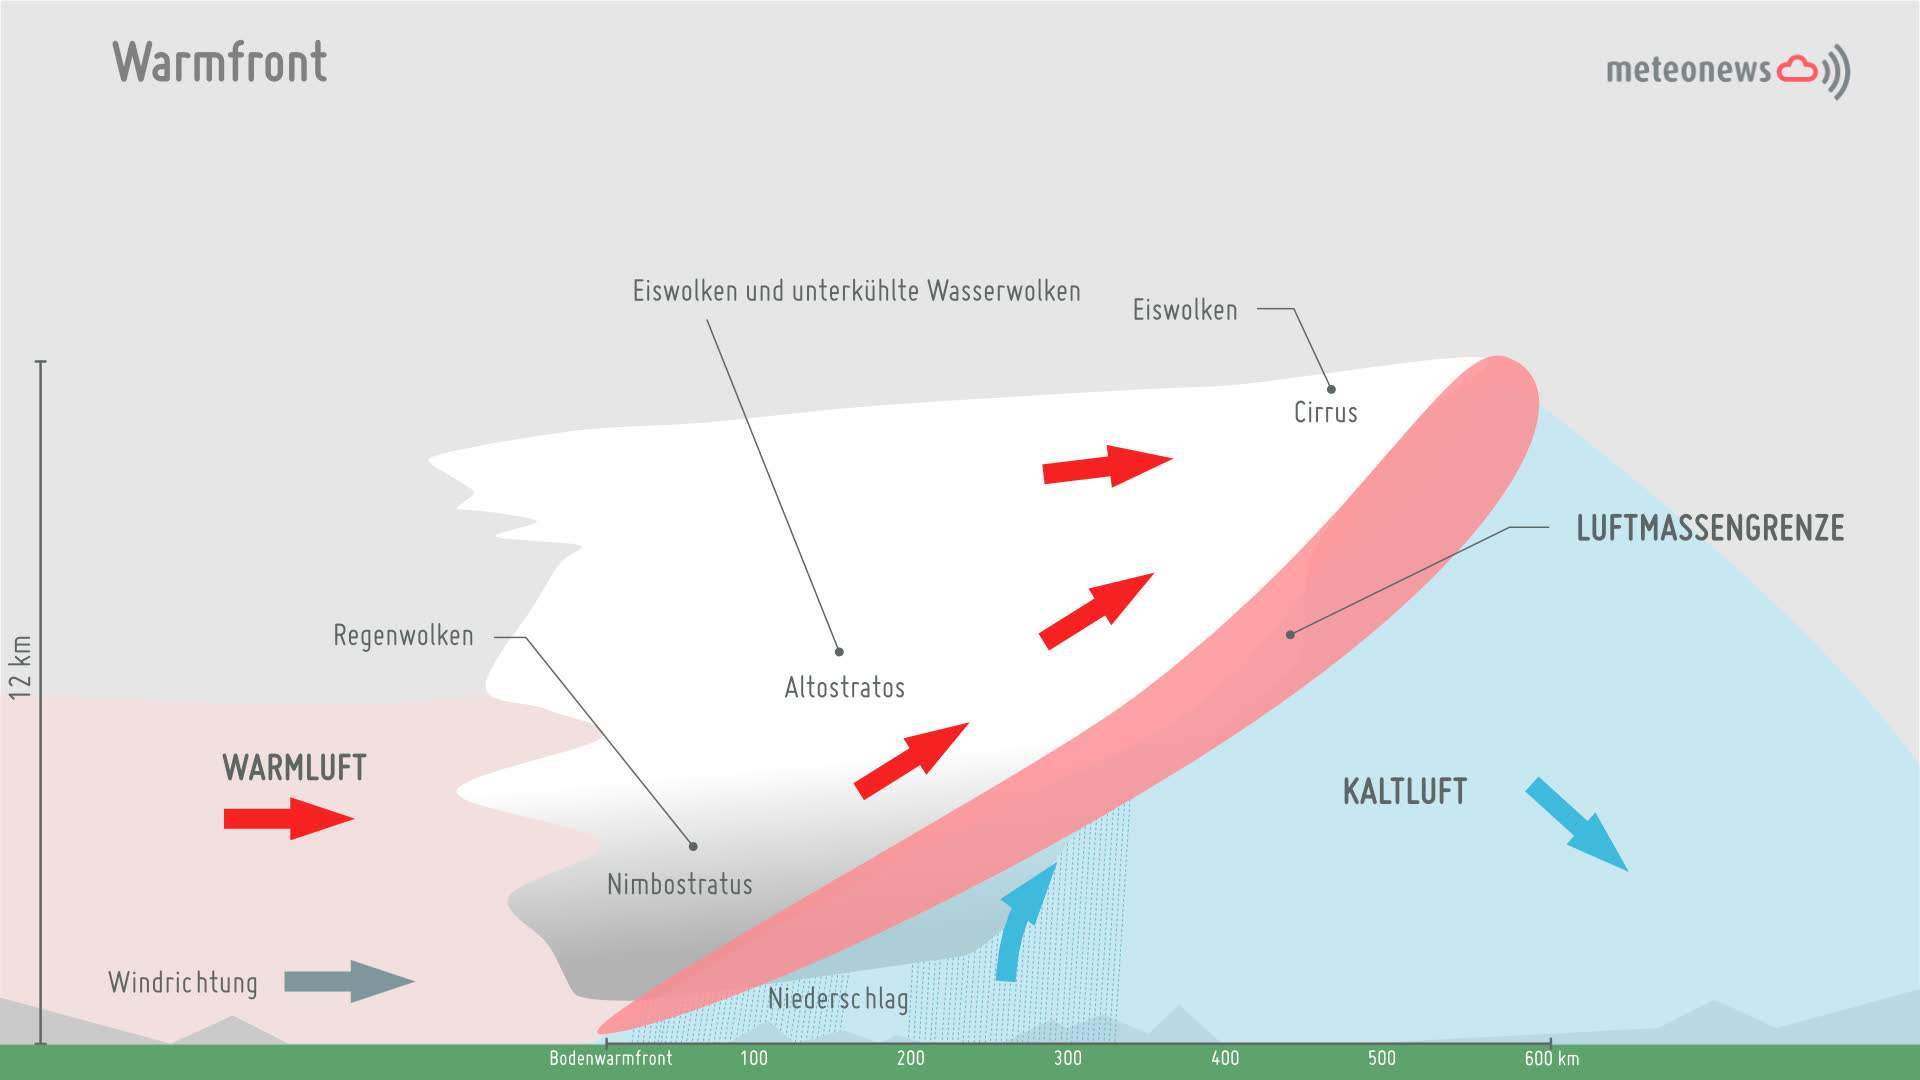 Fig. 2: Schematic representation of a warm front.; Source: MeteoNews